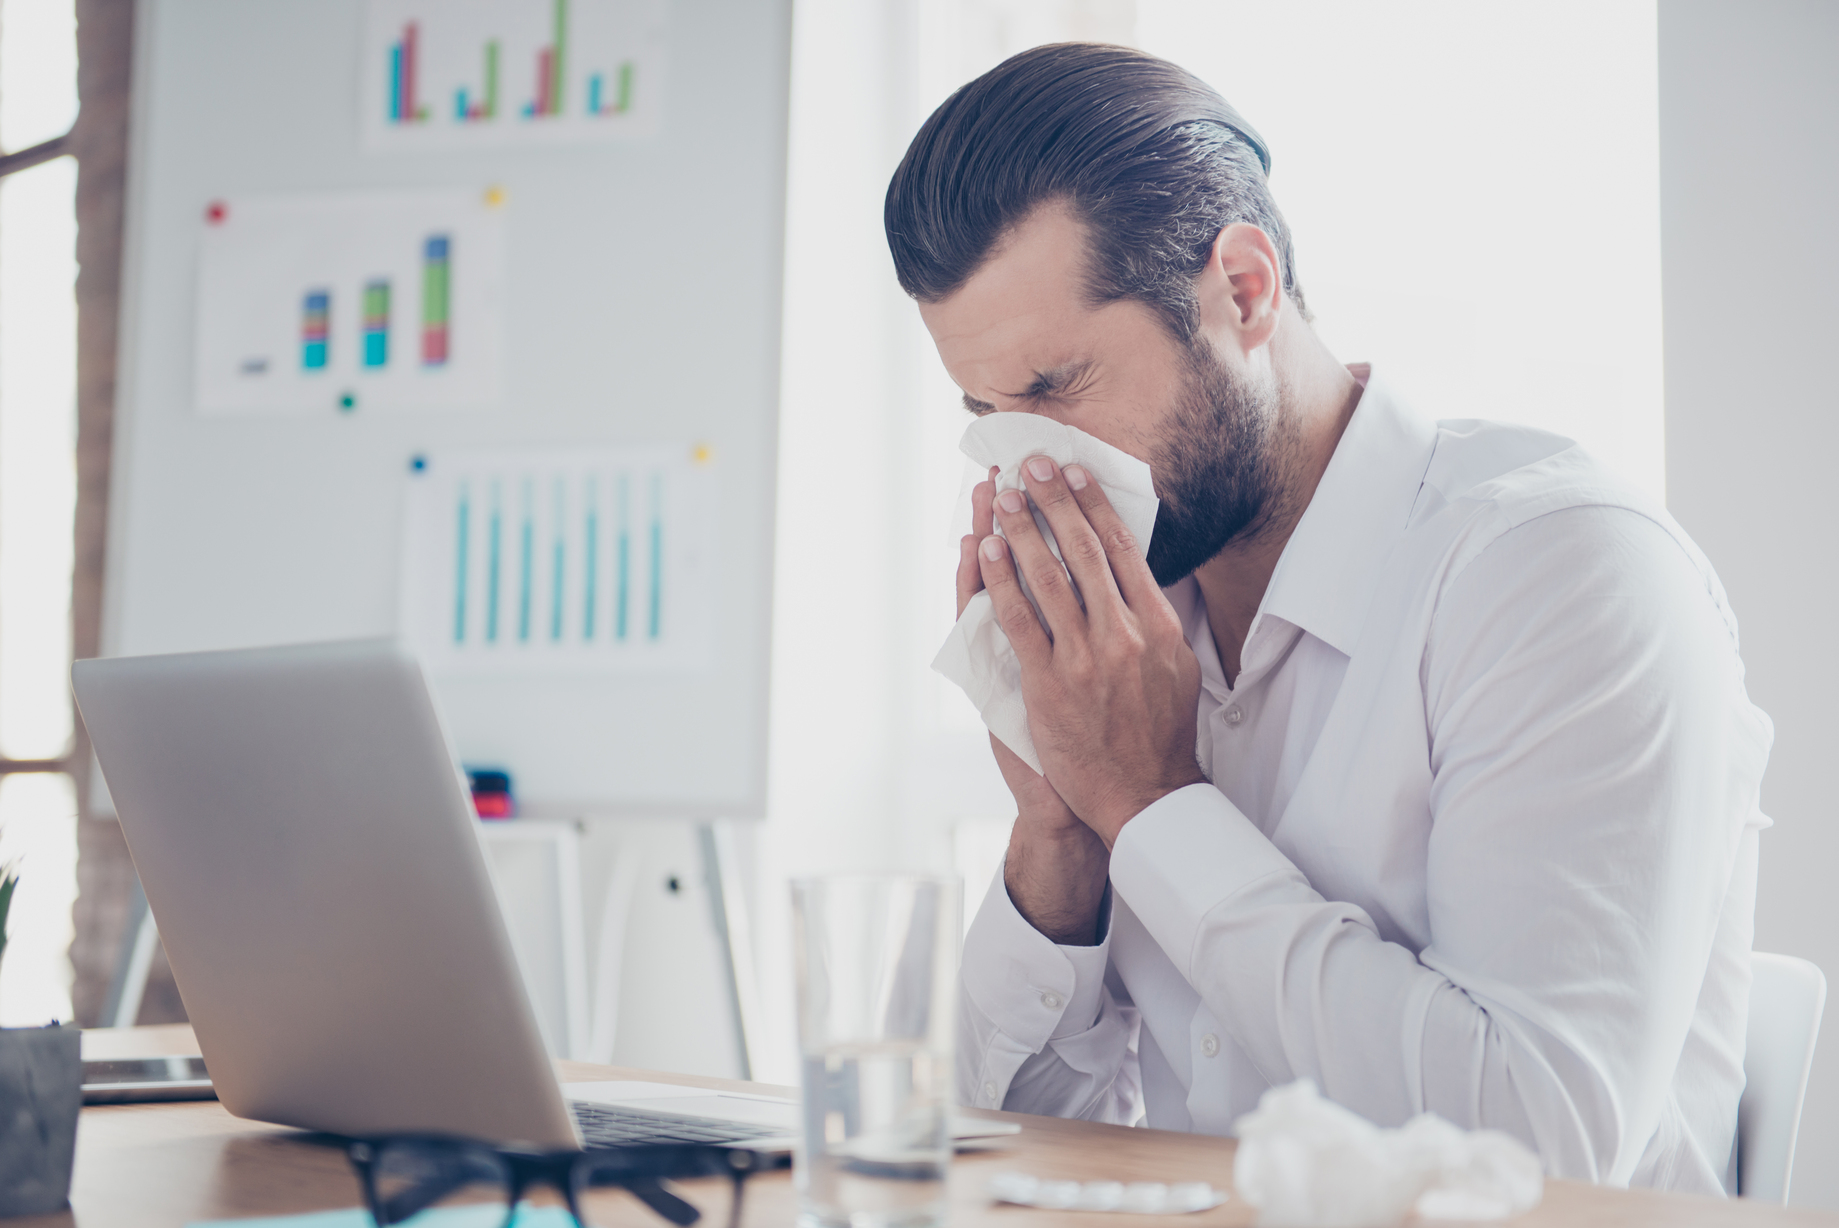 Picture of a man sneezing into a tissue while sitting in front of a laptop.